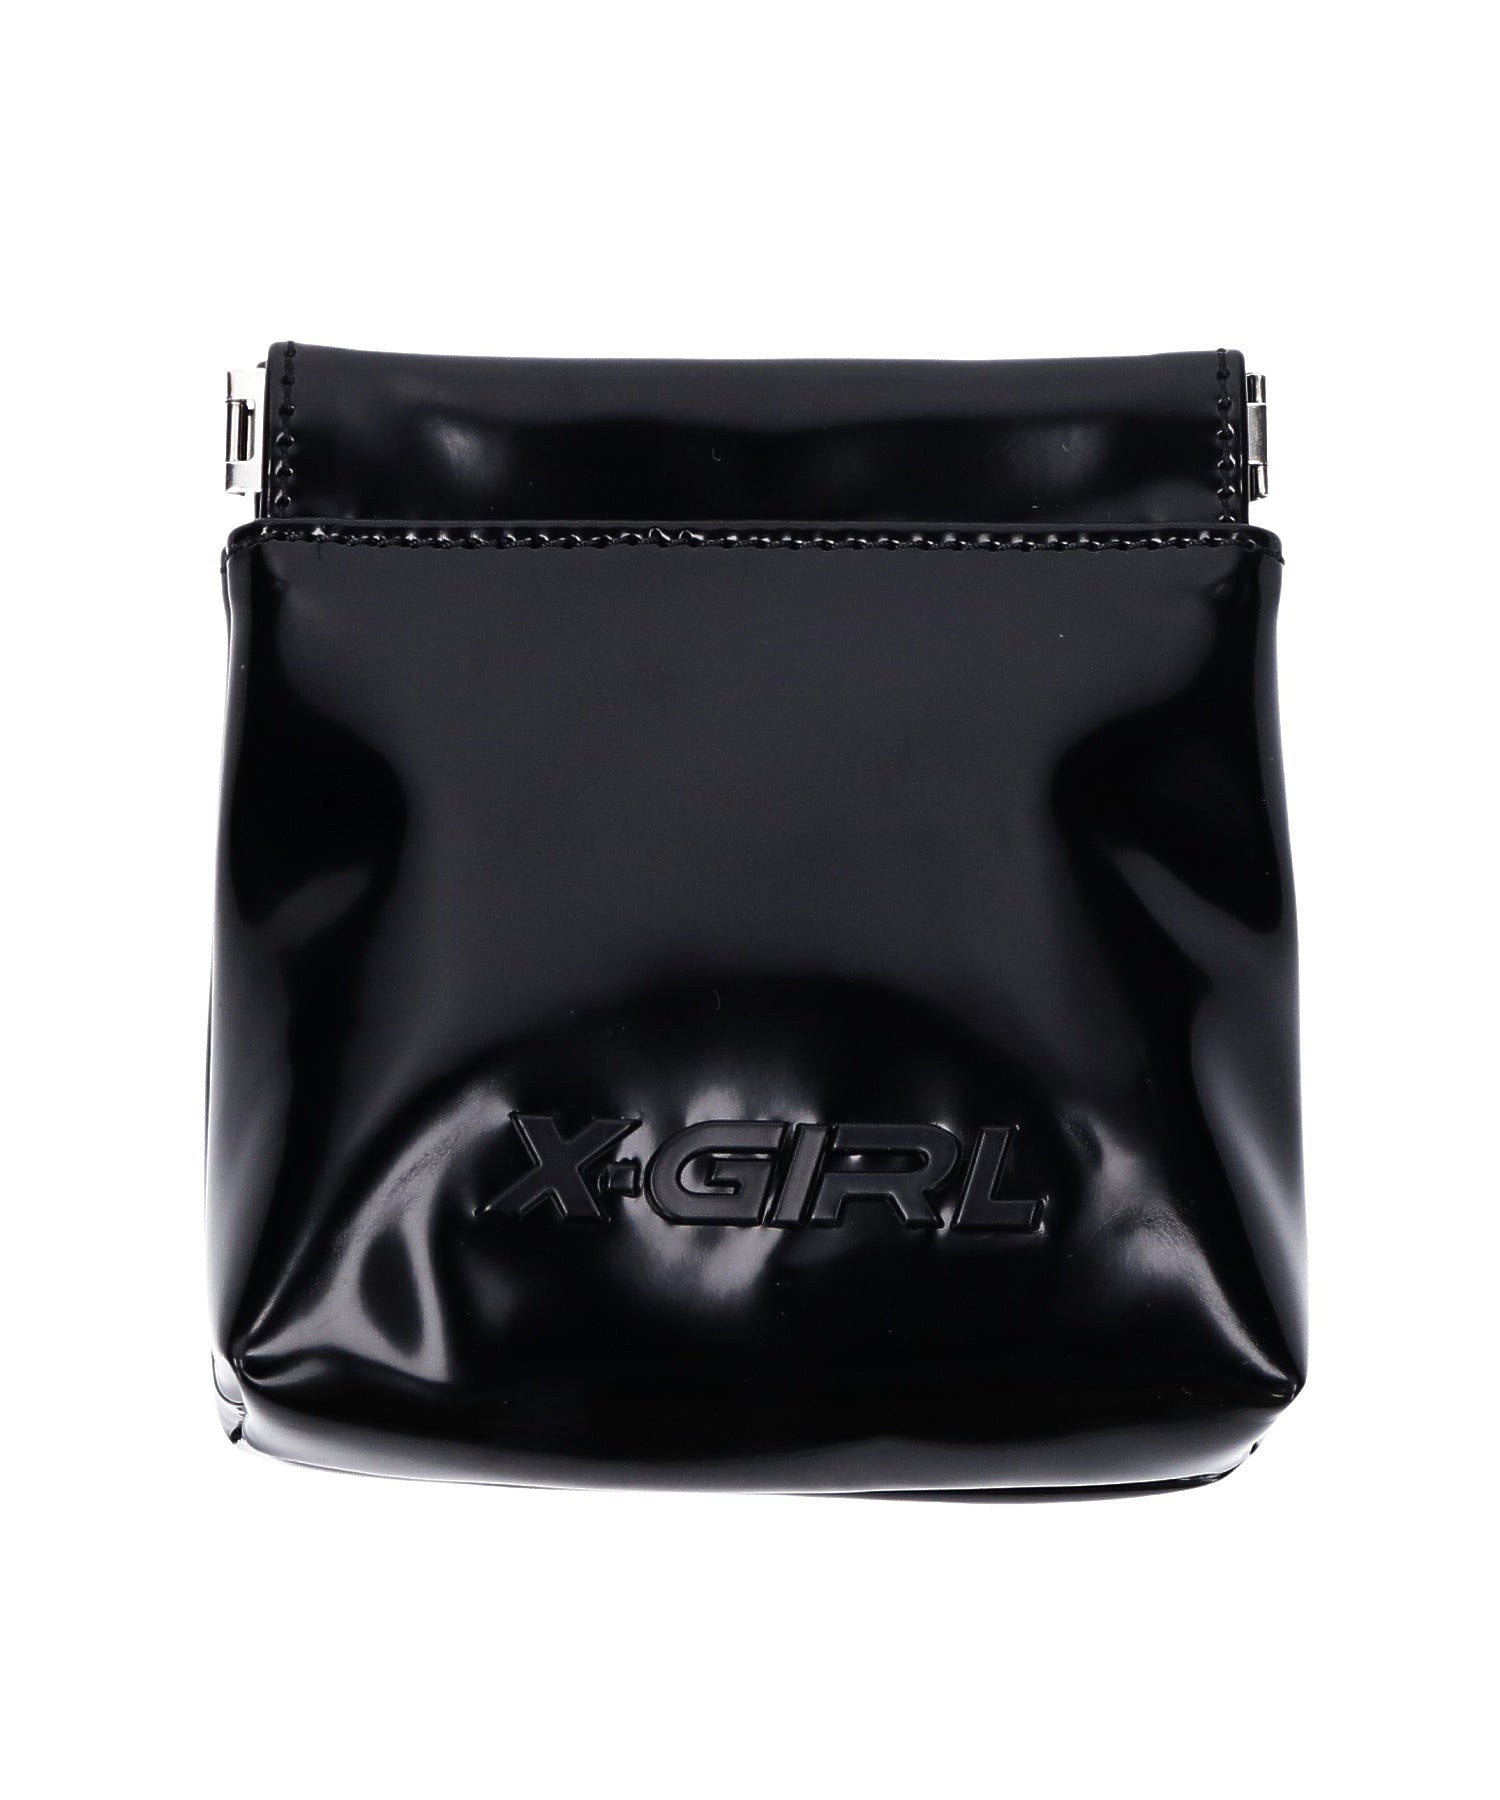 FAUX LEATHER LOGO POUCH X-girl